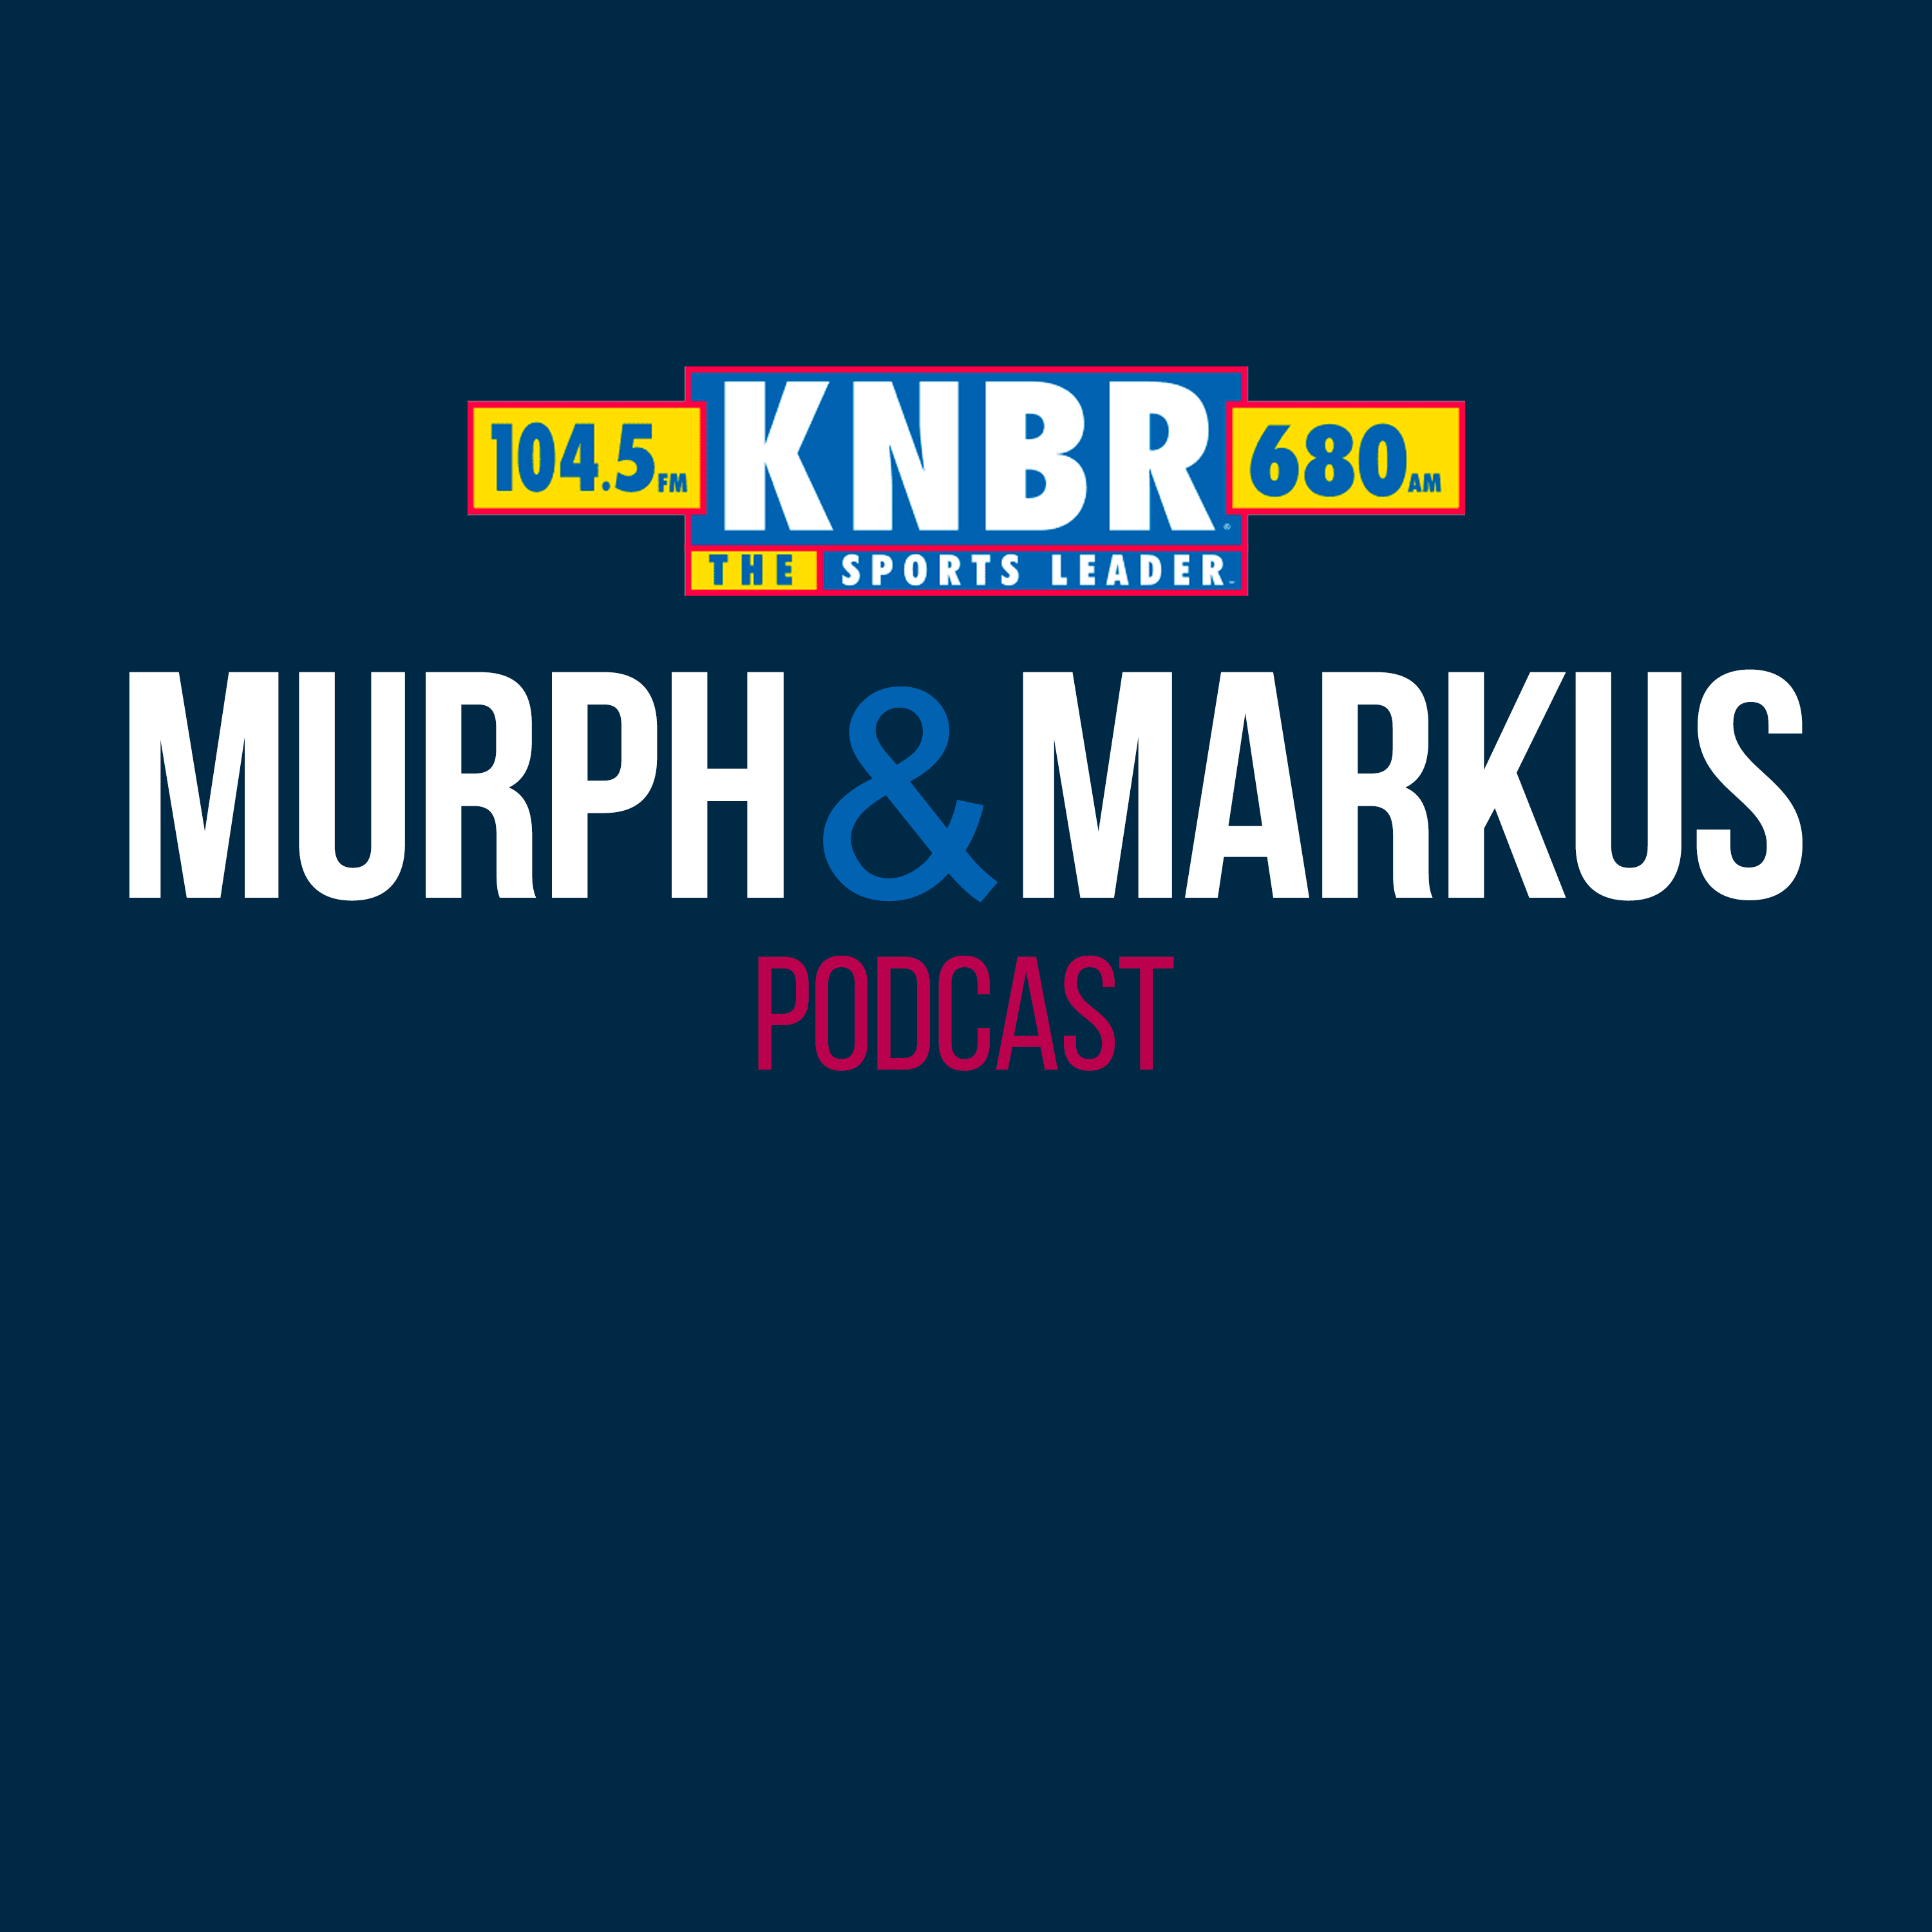 6-21 Hour 3: Murph & Markus talk to Rich Aurilia, dive into the Cooler of Content, and continue to react to Reggie Jackson's pregame comments discussing what it's like for him to return to Rickwood Field